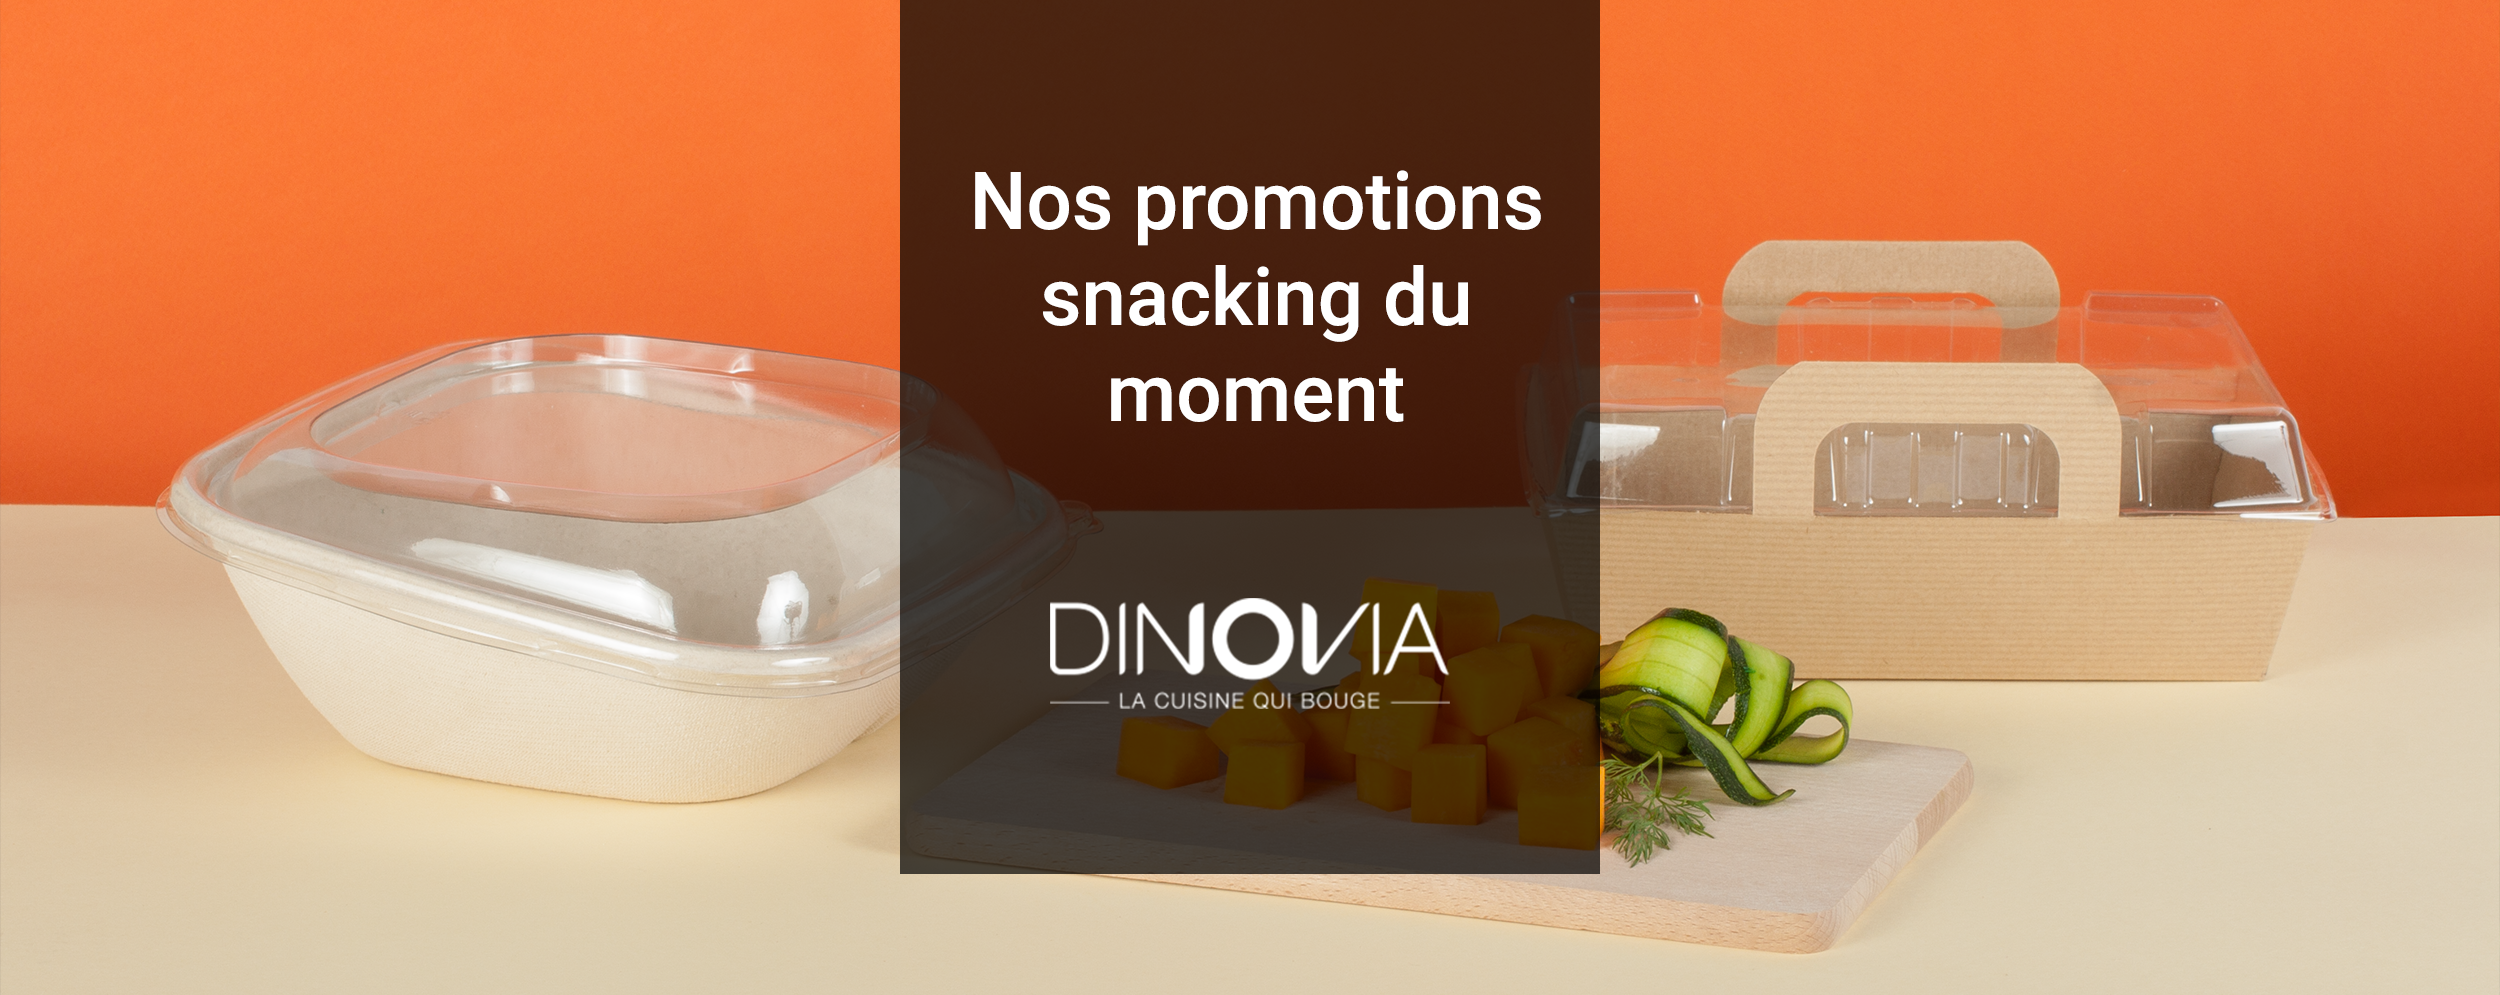 Nos promotions snacking